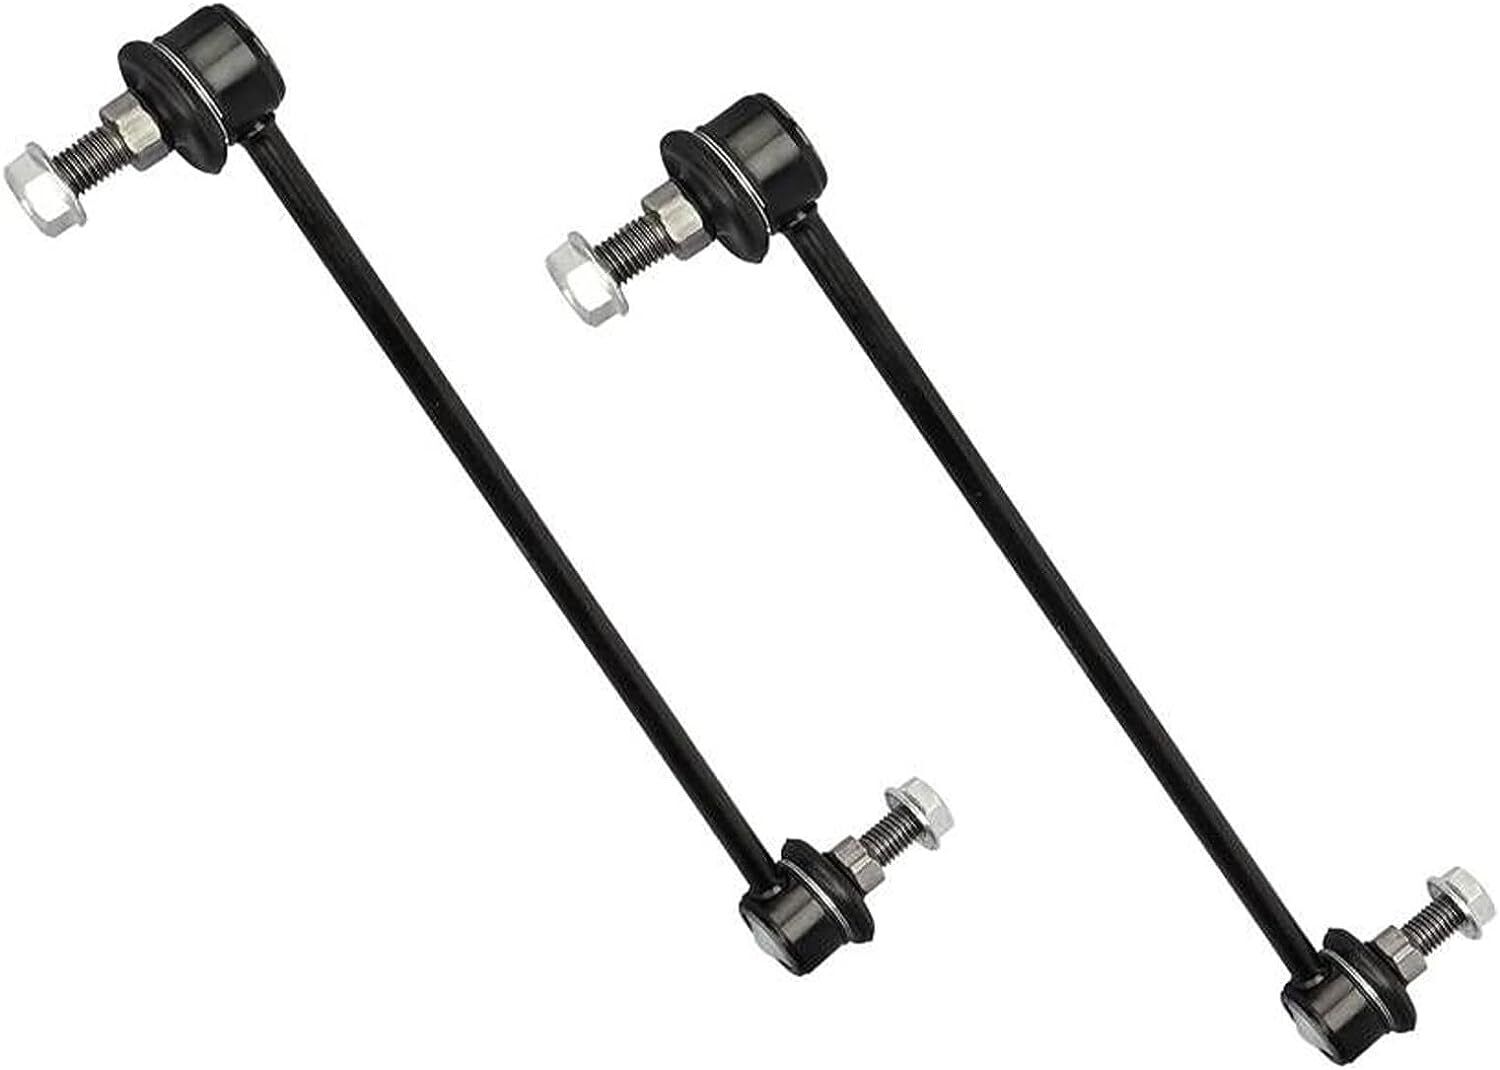 Set of 2 Front Stabilizer Sway Bar End Links for Kia Rondo 2007-2012